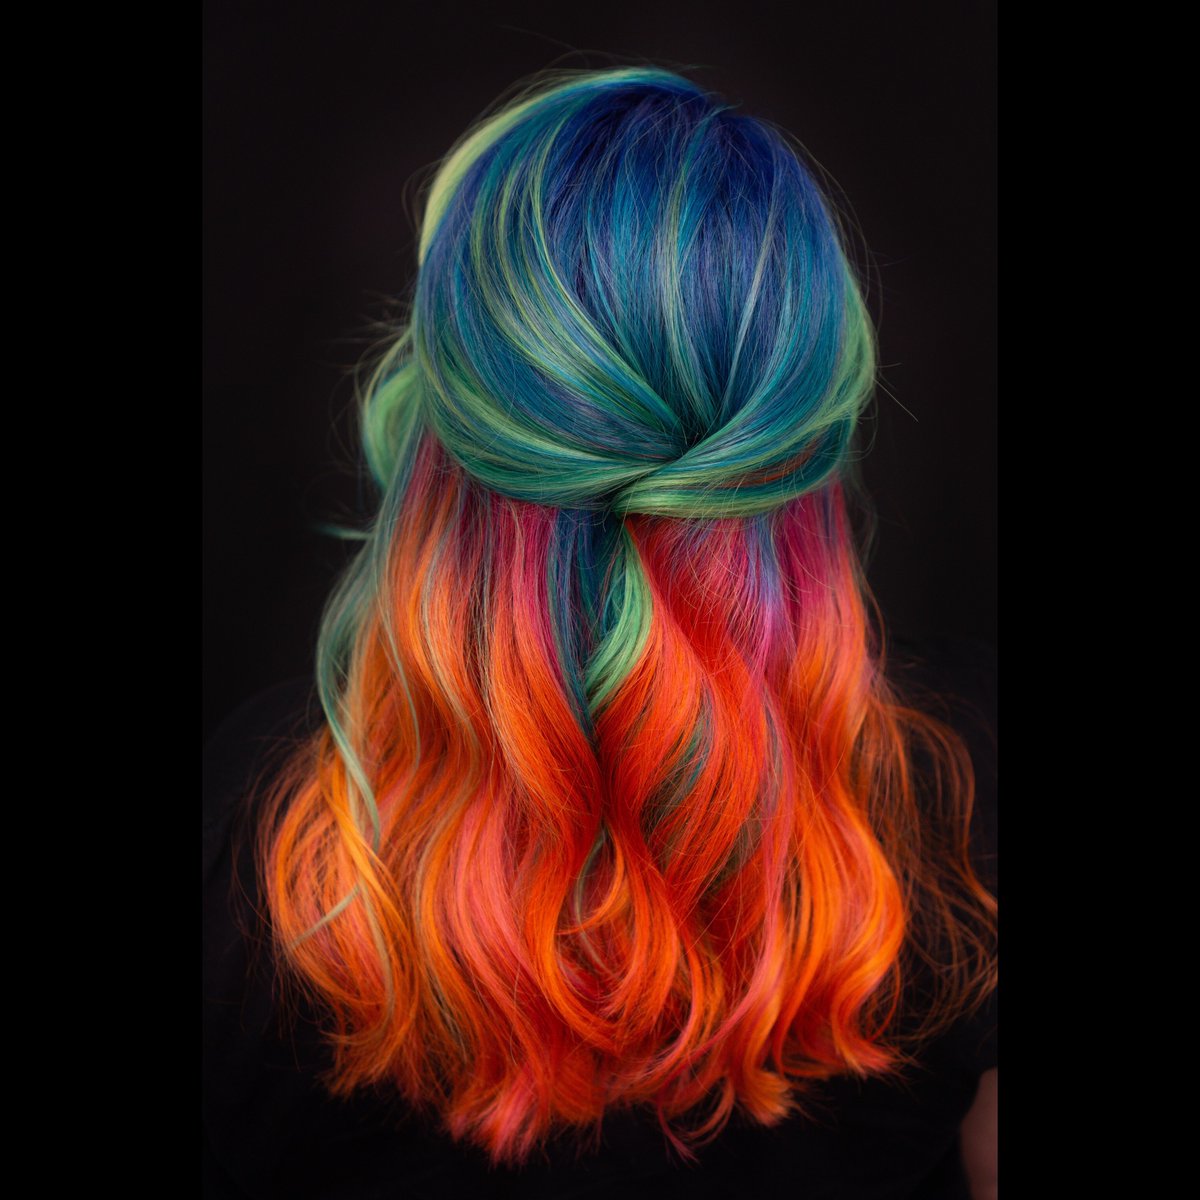 #FireandWater 🔥💧This gorgeous, neon #rainbowhair was #handpainted by Naomi w/ the fab @PulpRiotHair 🤩🙌 #neon #neonhair #balayage #pulpriot #pulpriothair #pulpriotcolor #pulpriothaircolor #multicoloredhair #fantasycolor #fantasyhair #vibranthair #fashioncolors #colorfulhair